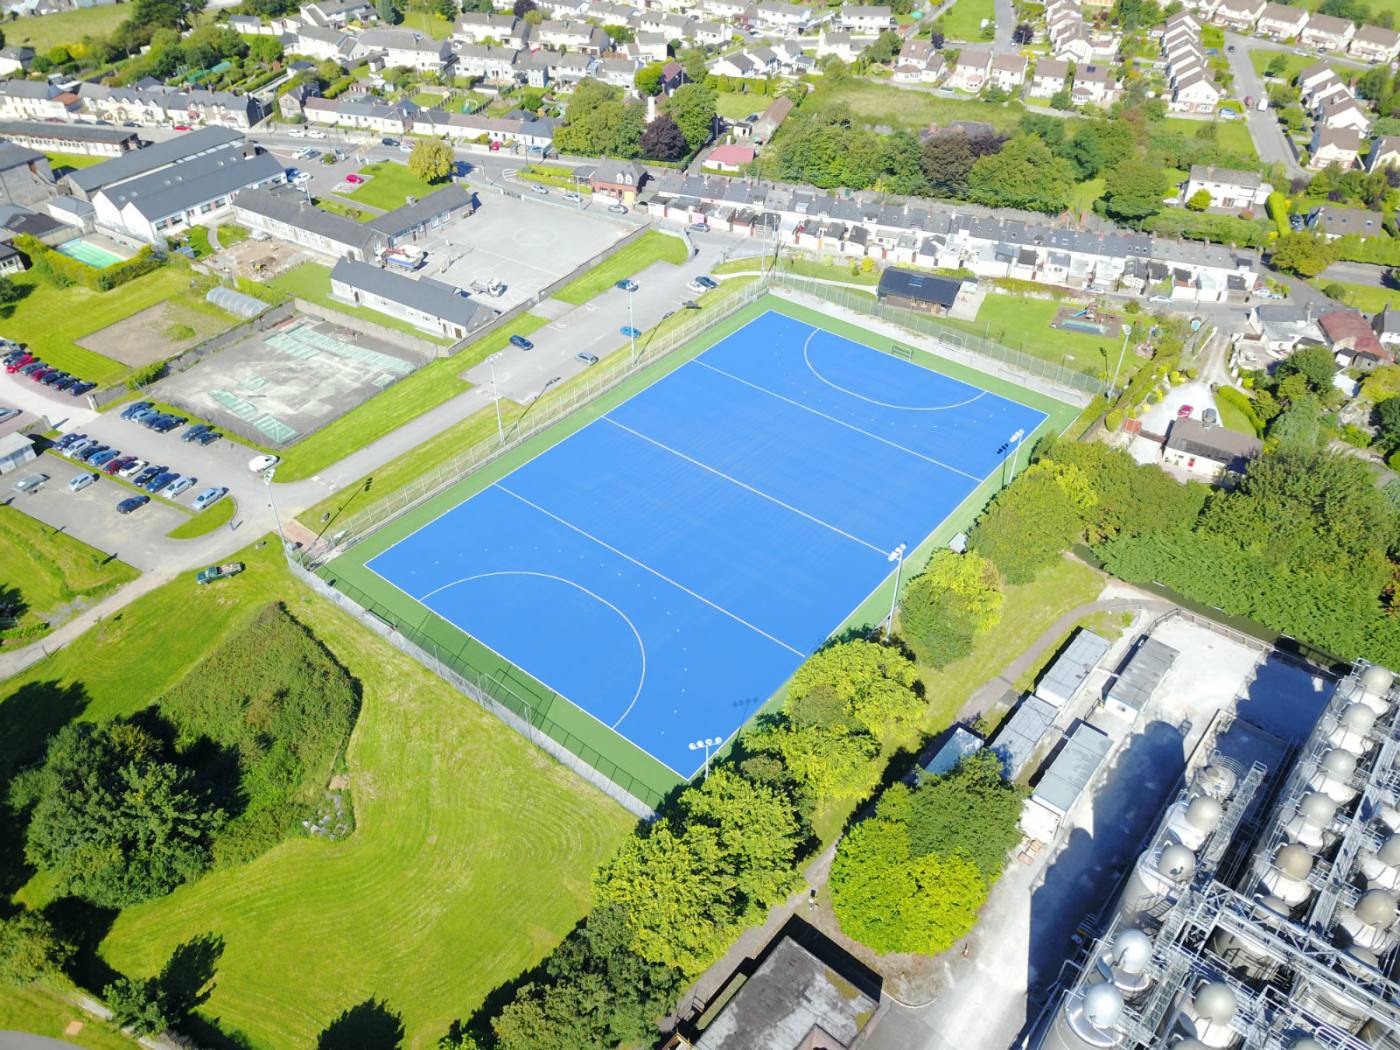 Artificial grass hockey pitch at Midleton College Cork